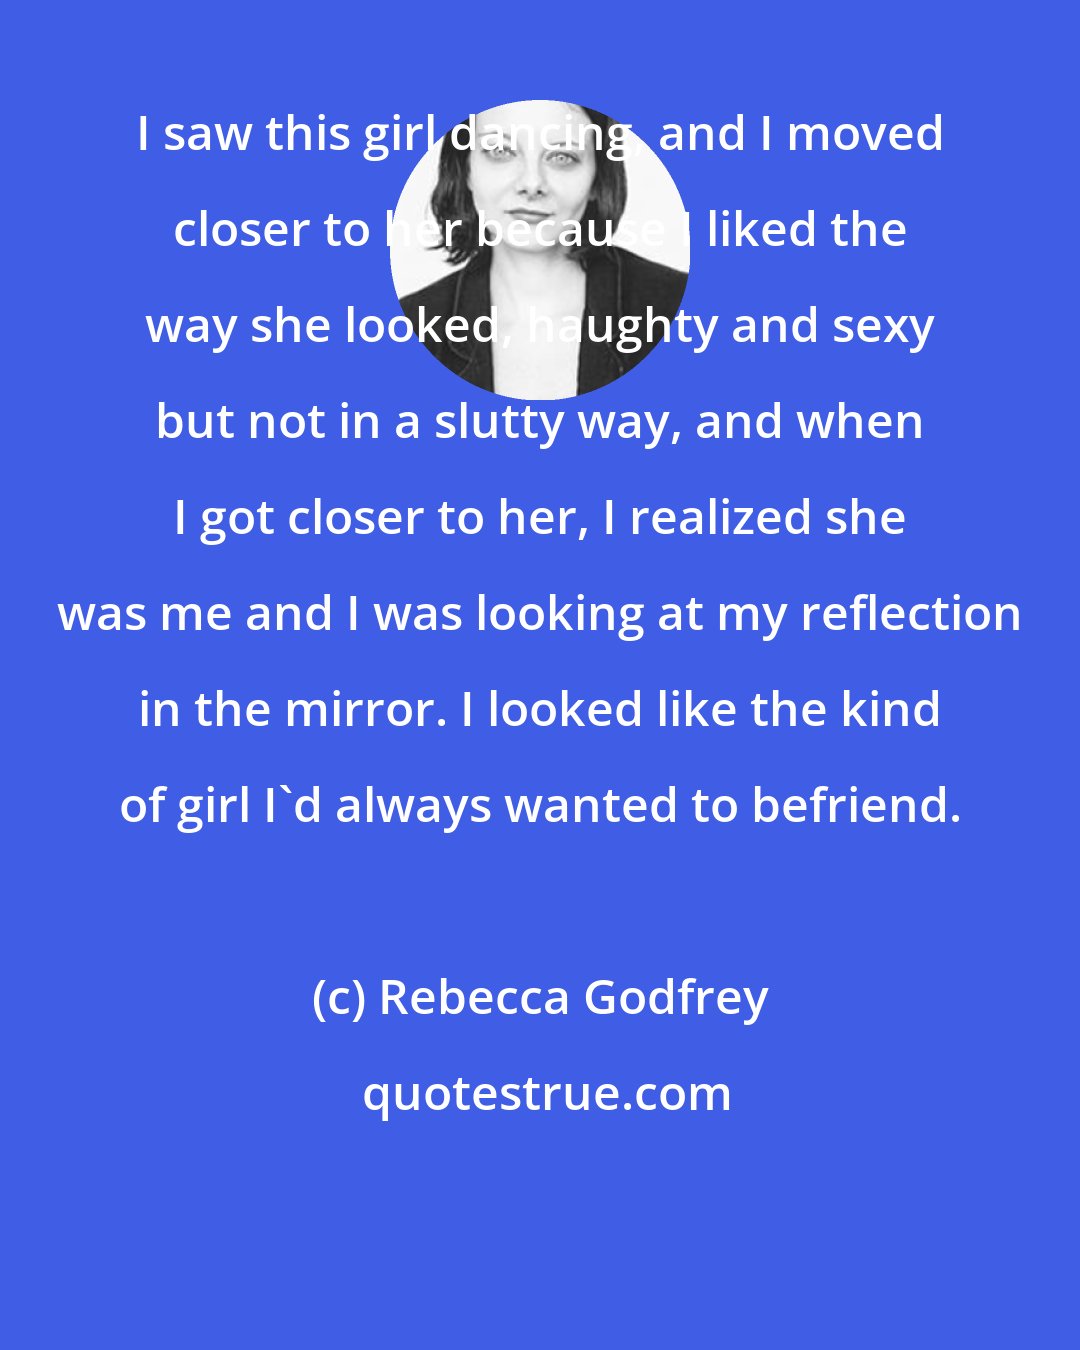 Rebecca Godfrey: I saw this girl dancing, and I moved closer to her because I liked the way she looked, haughty and sexy but not in a slutty way, and when I got closer to her, I realized she was me and I was looking at my reflection in the mirror. I looked like the kind of girl I'd always wanted to befriend.